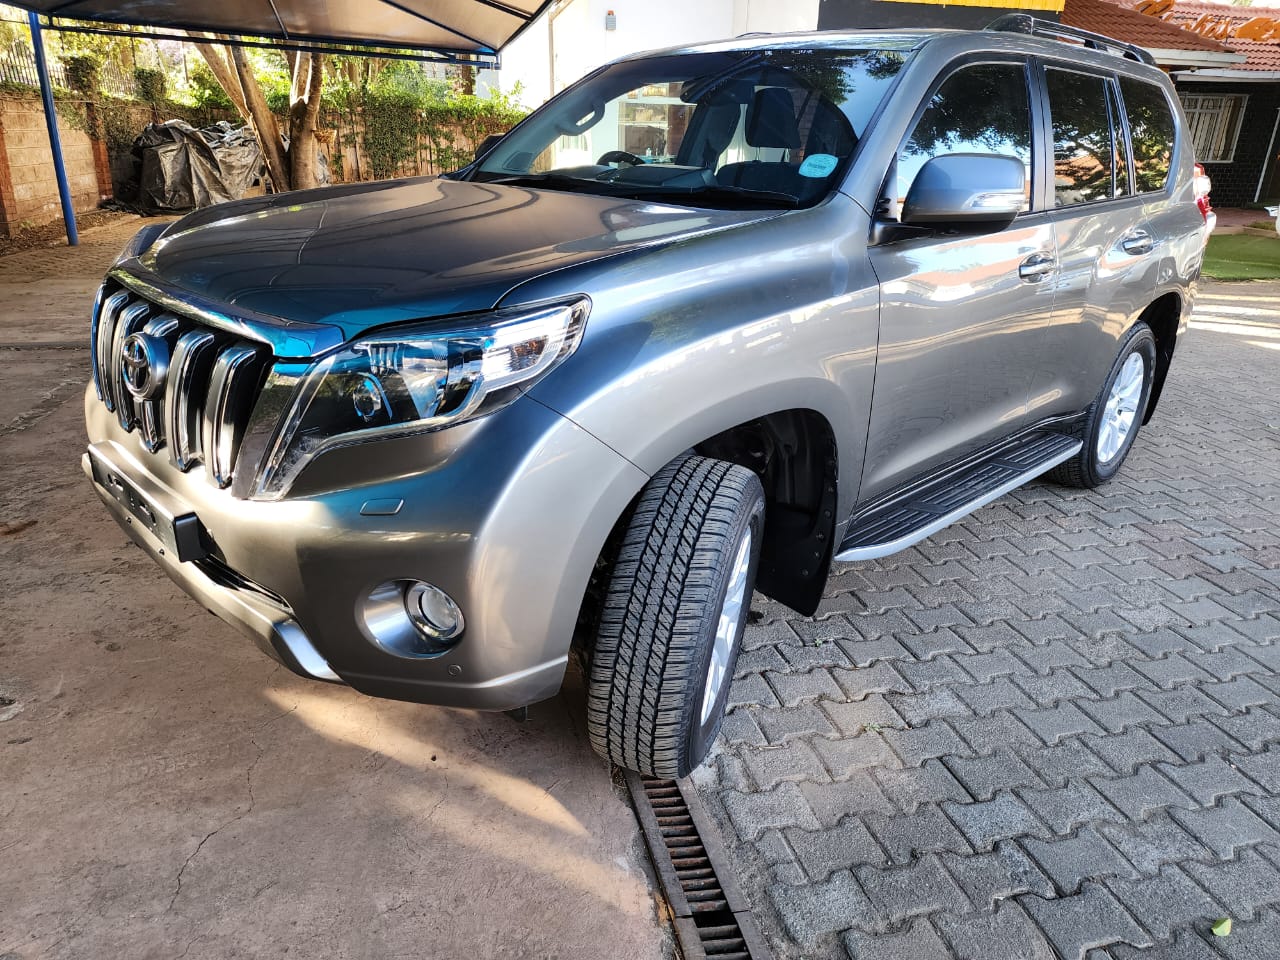 Toyota Prado 2015 VXL DIESEL You Pay 30% Deposit Trade in OK with SUNROOF